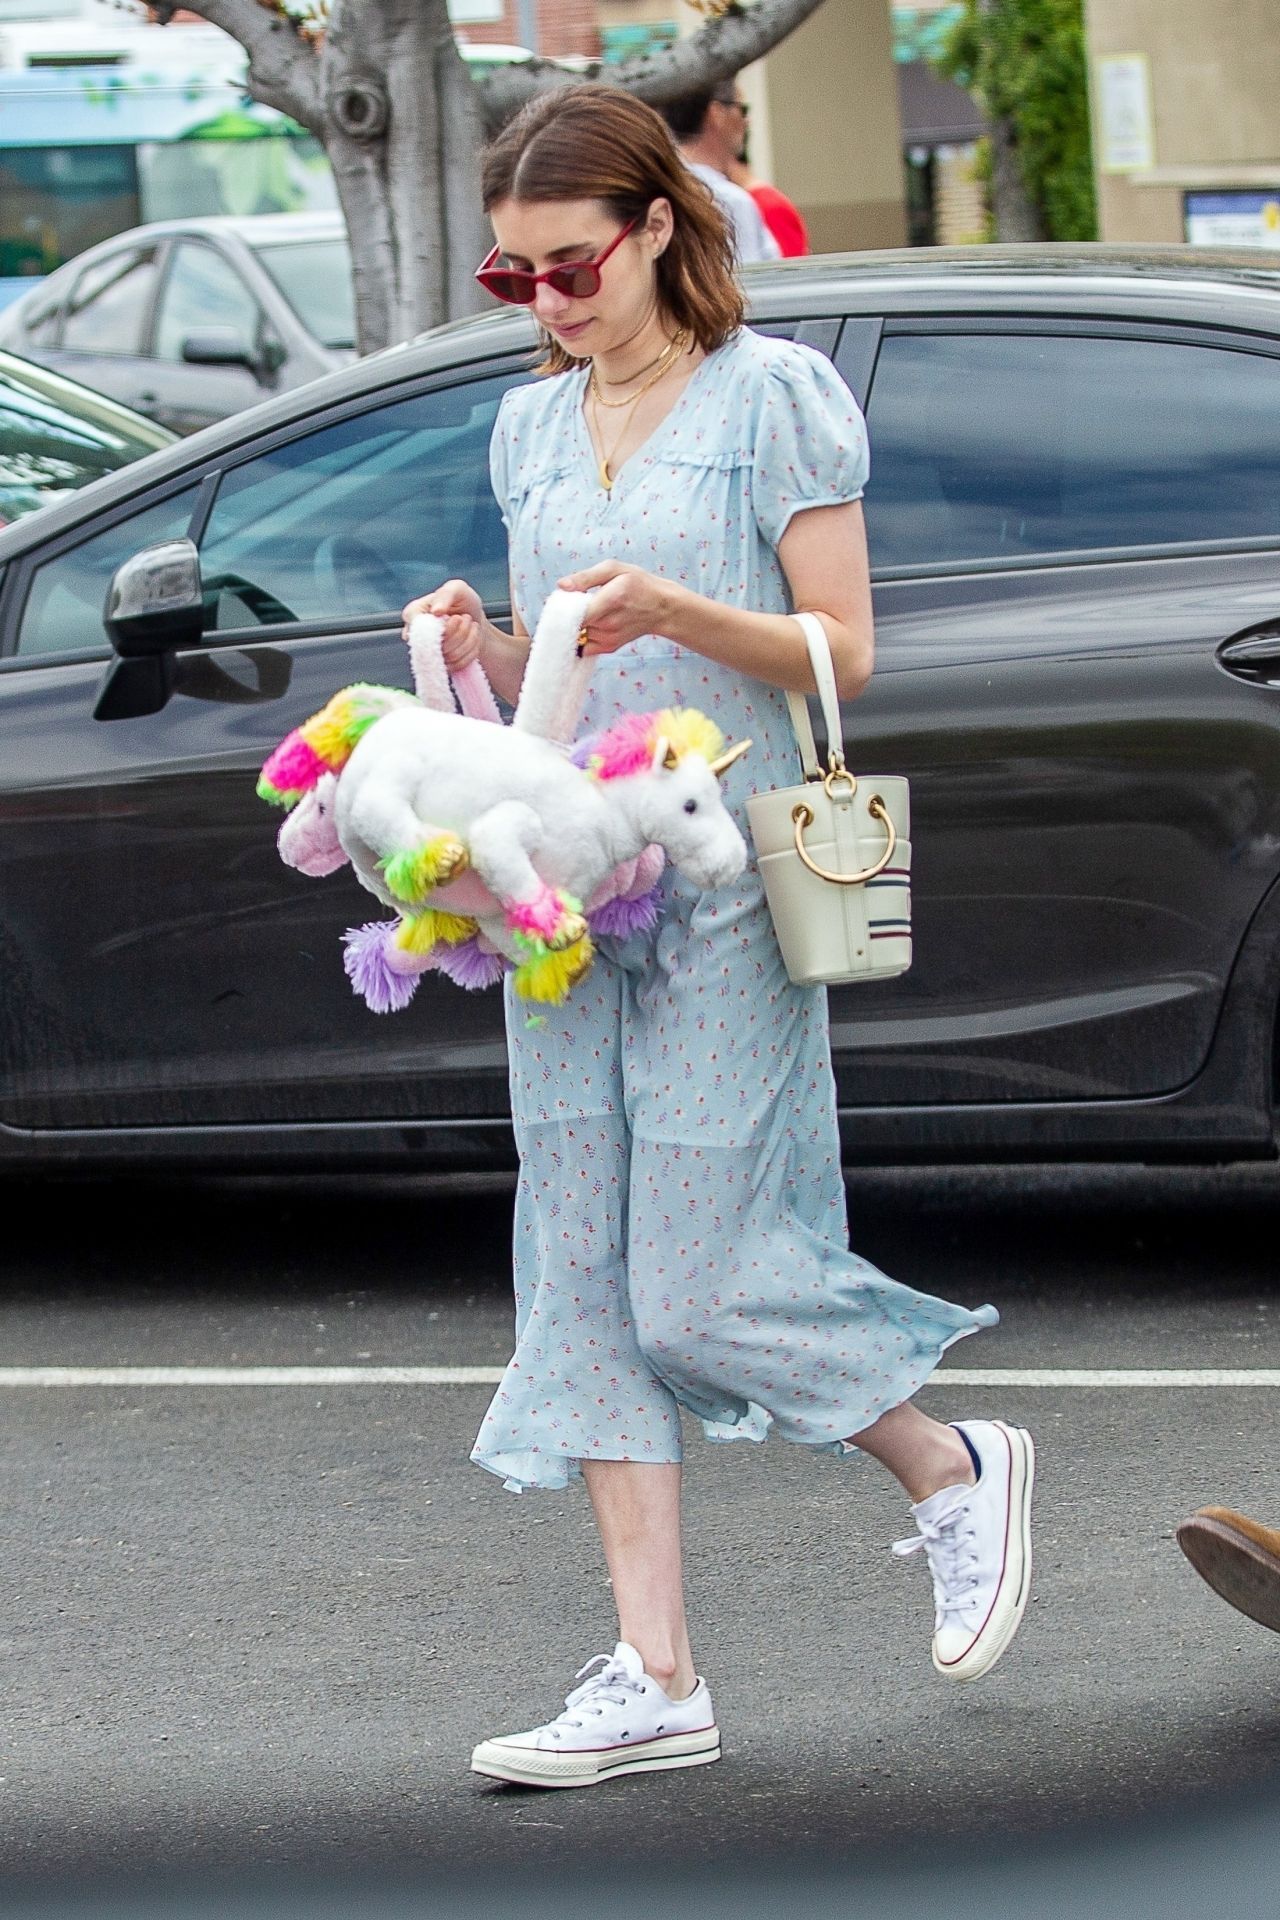 emma-roberts-shopping-on-easter-in-los-angeles-04-21-2019-12.jpg